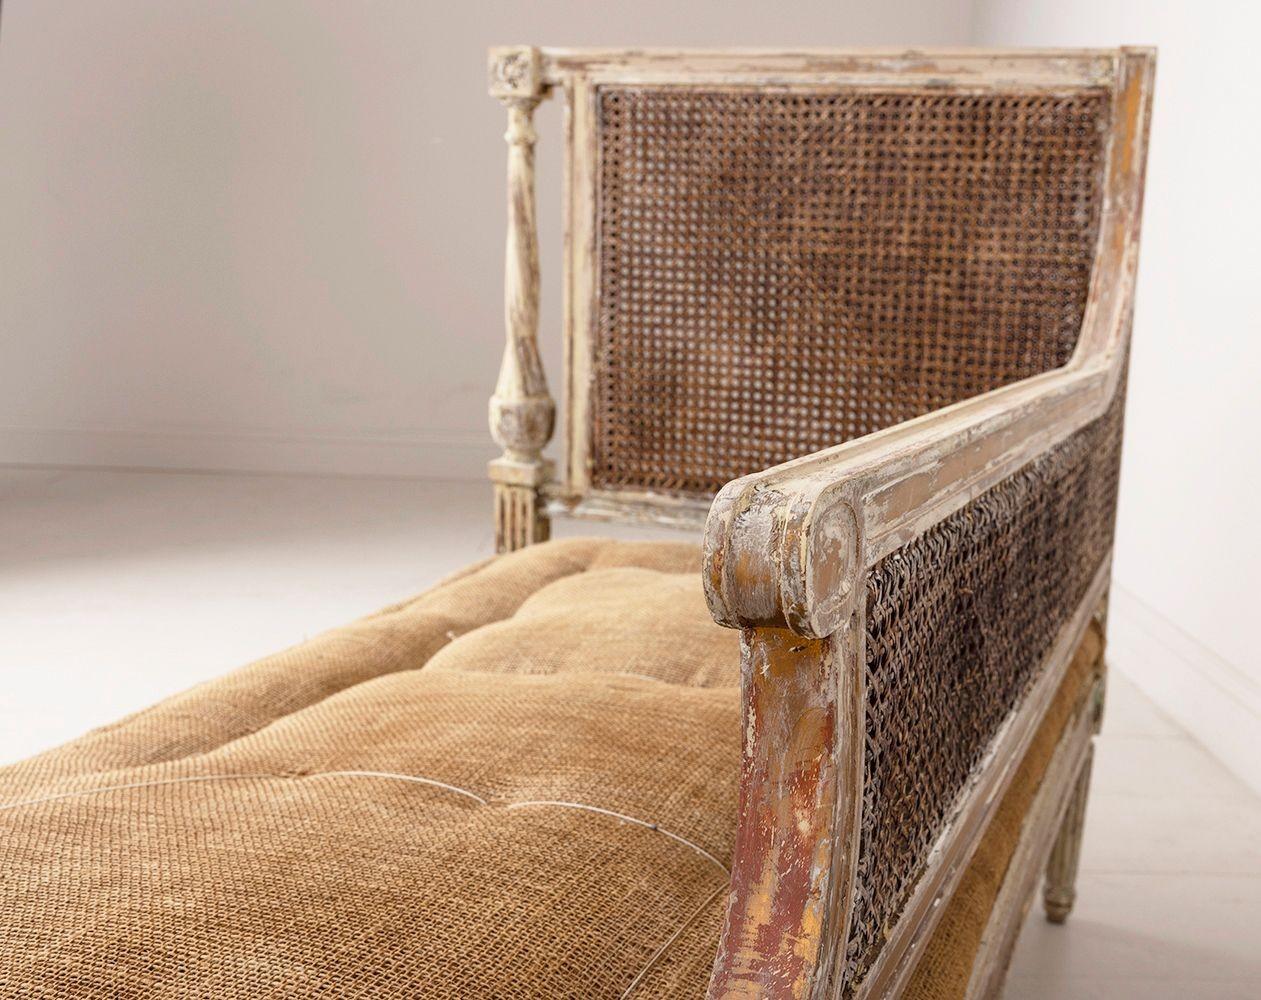 19th Century 19th C. French Louis XVI Style Caned Chaise Lounge or Daybed For Sale